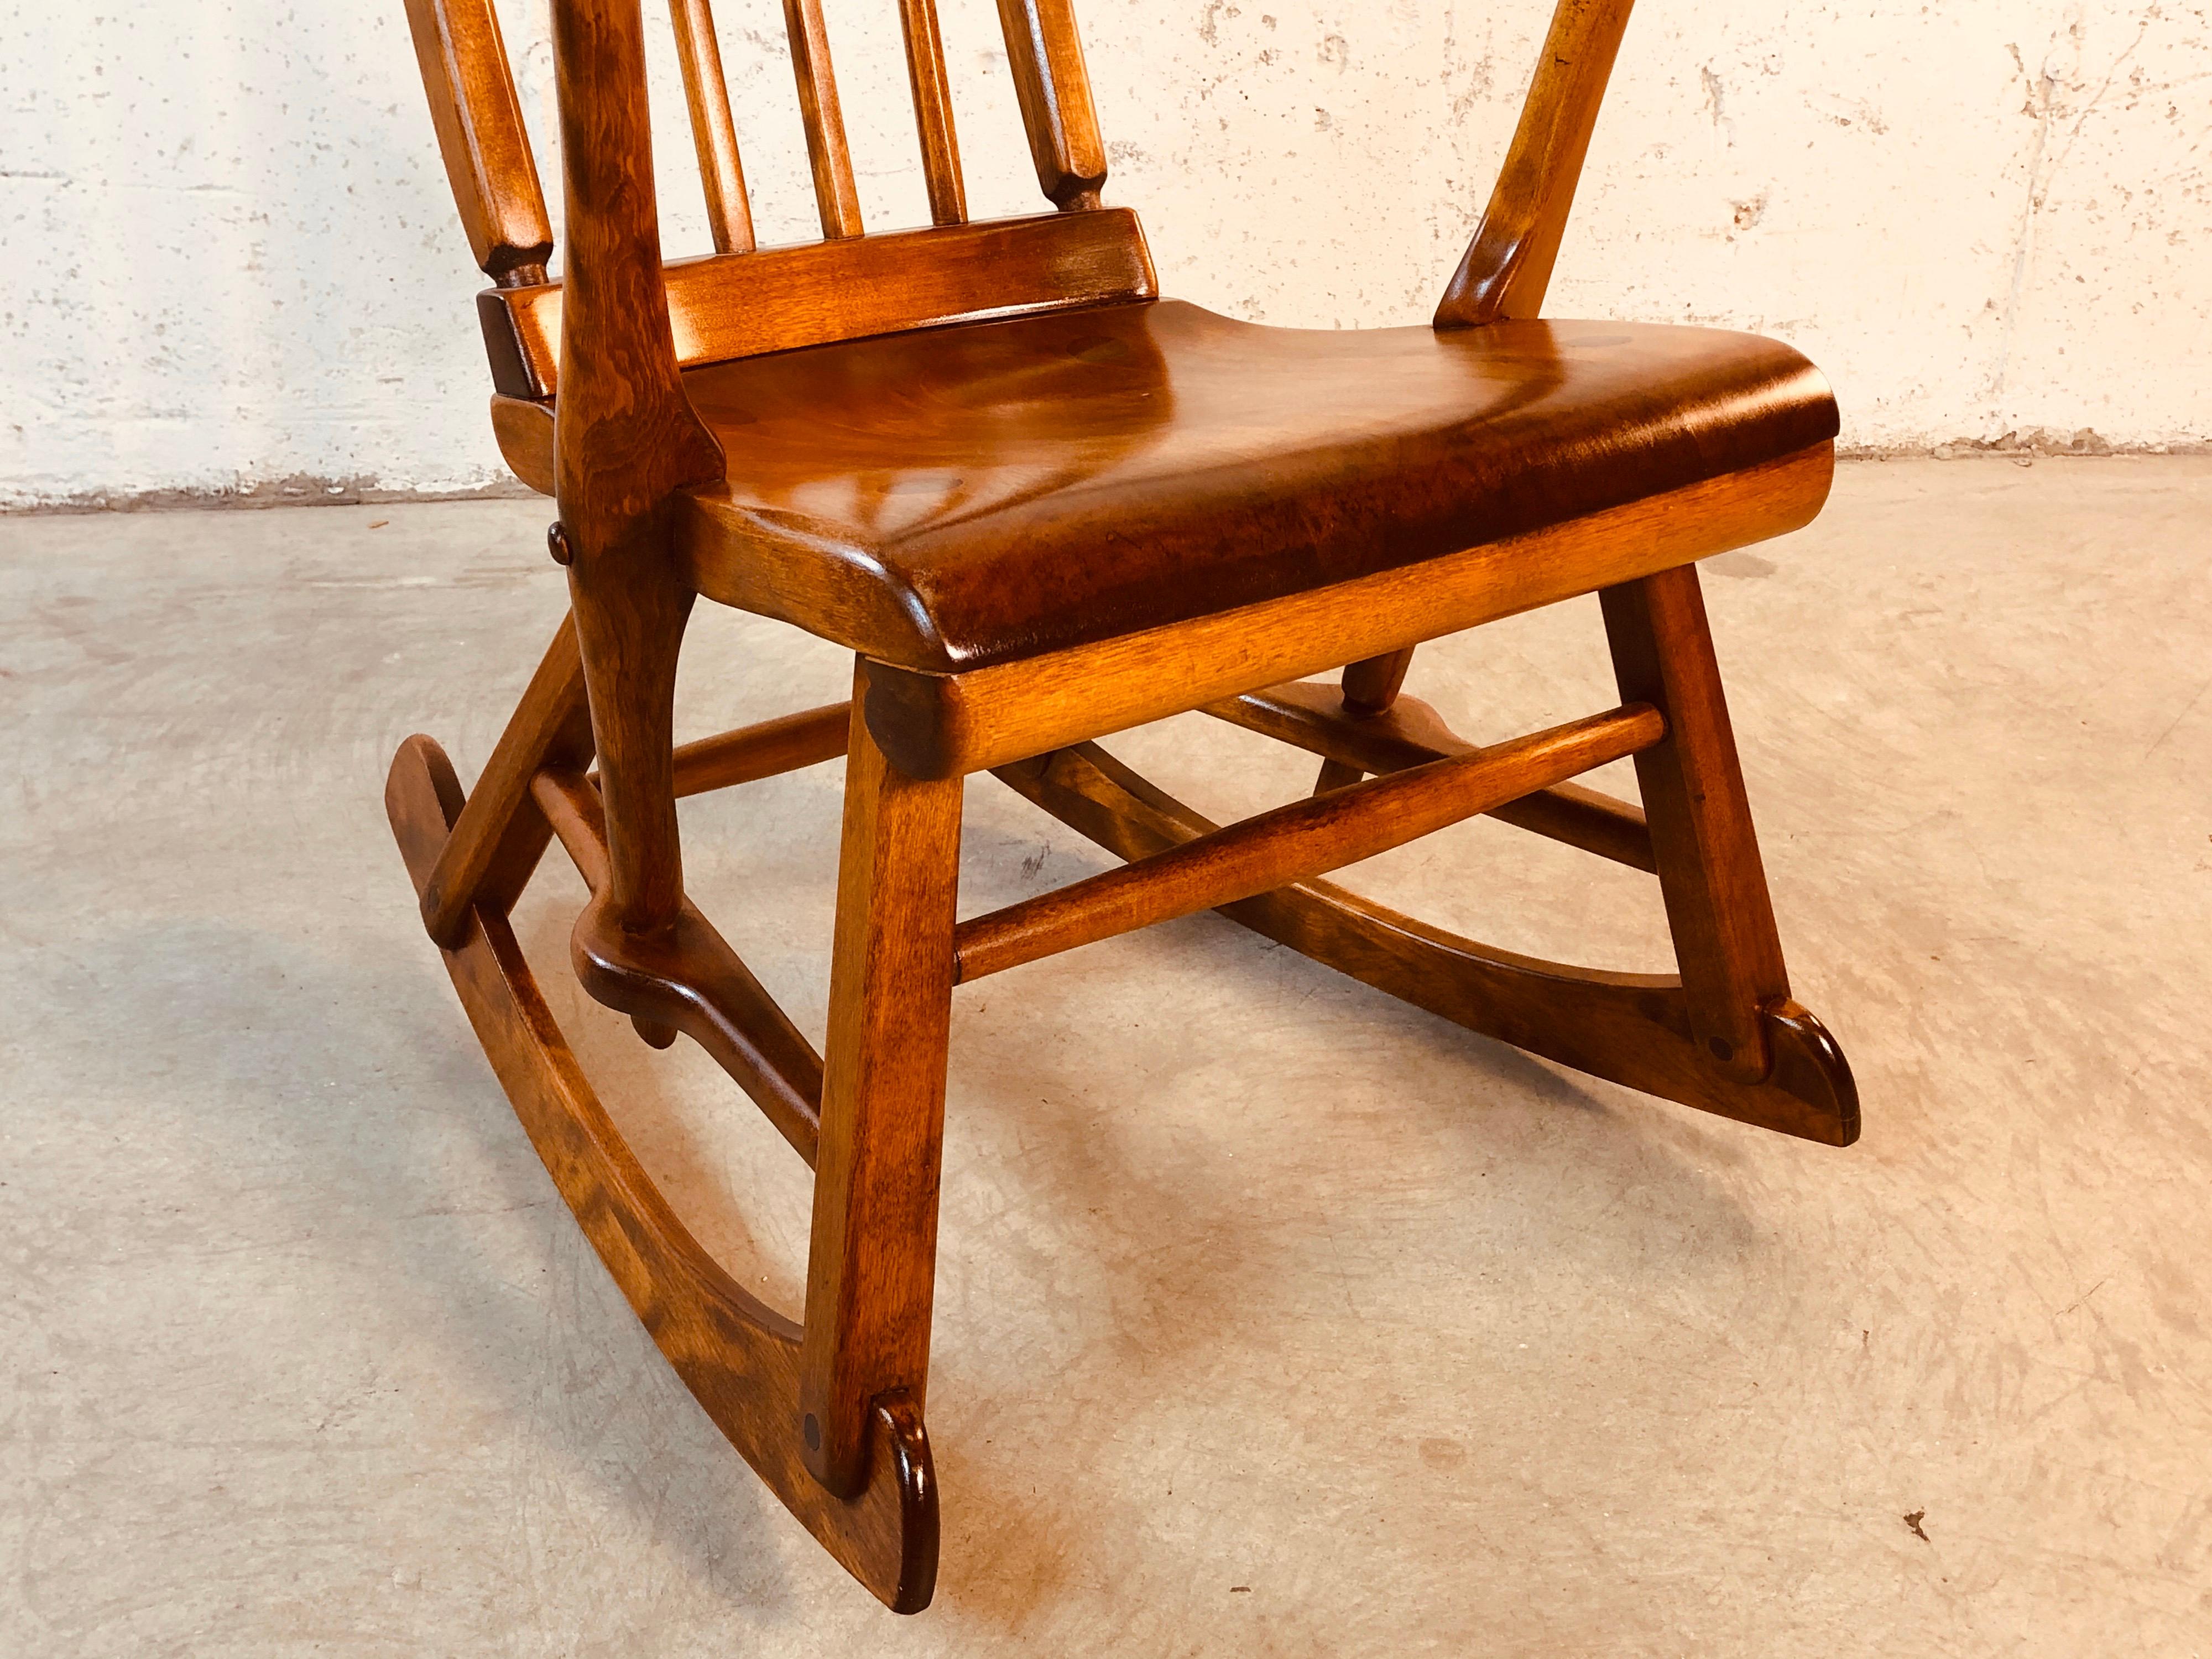 American Colonial Colonial American High-Back Rocking Chair by Herman De Vries for Sikes Furniture